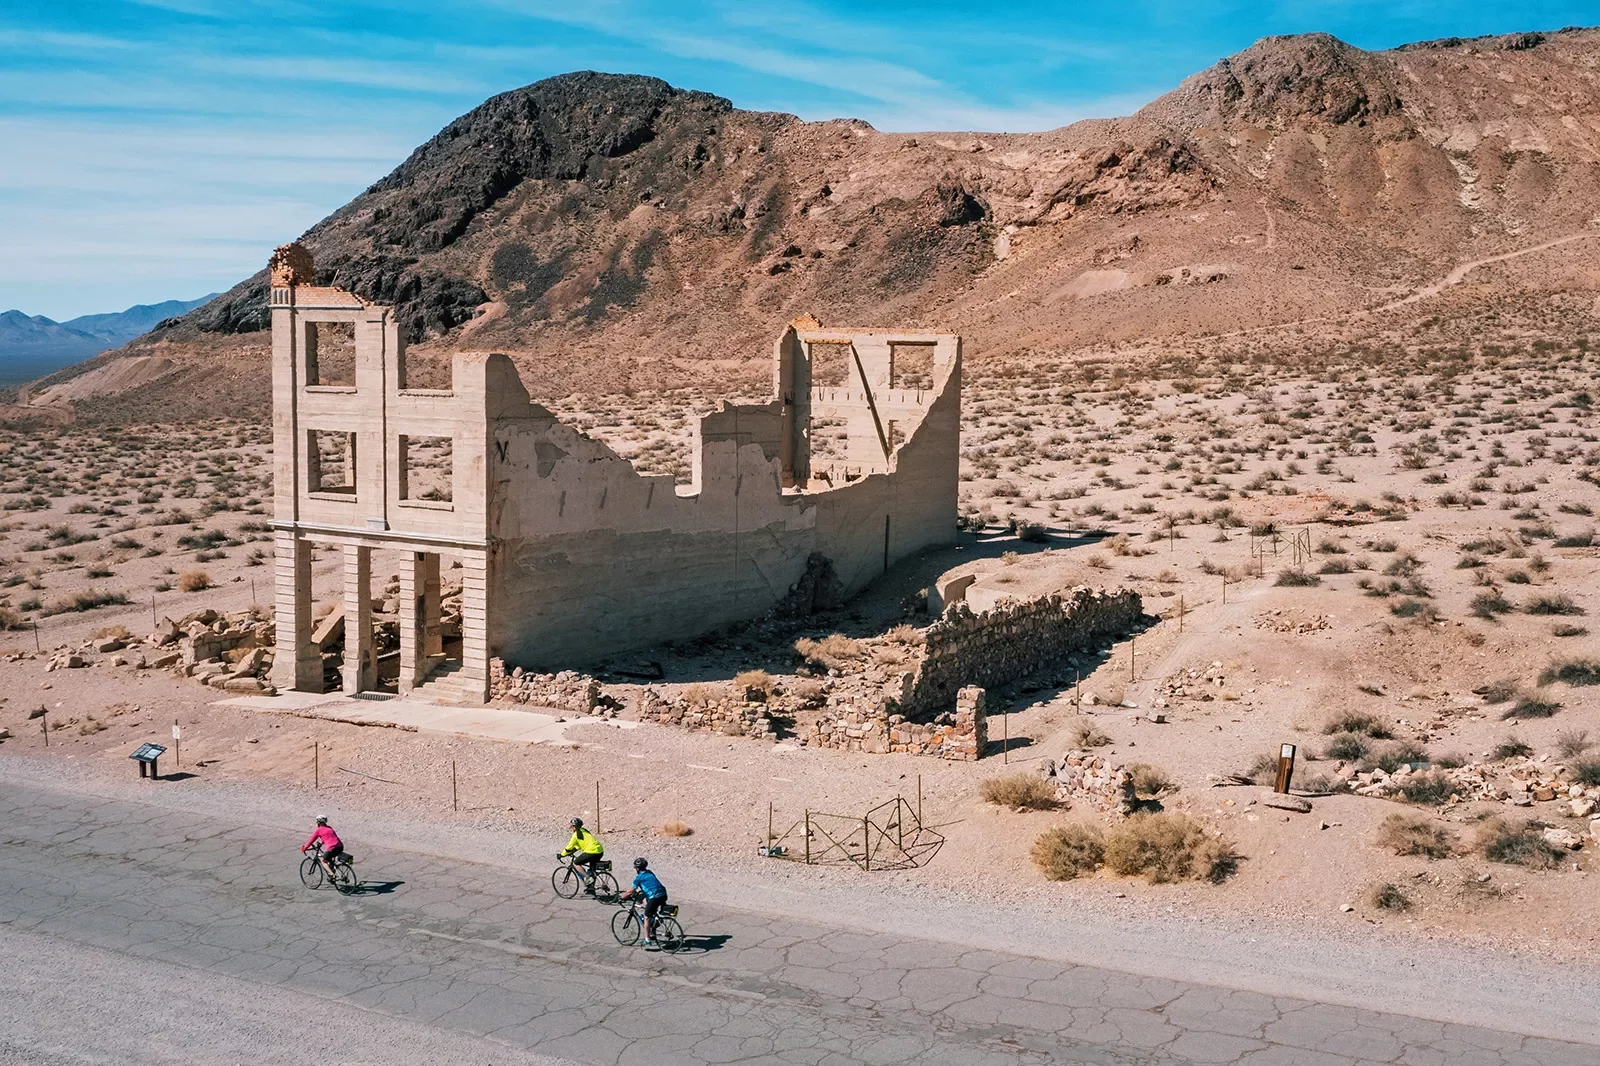 Guests biking through California desert with abandoned building in background.